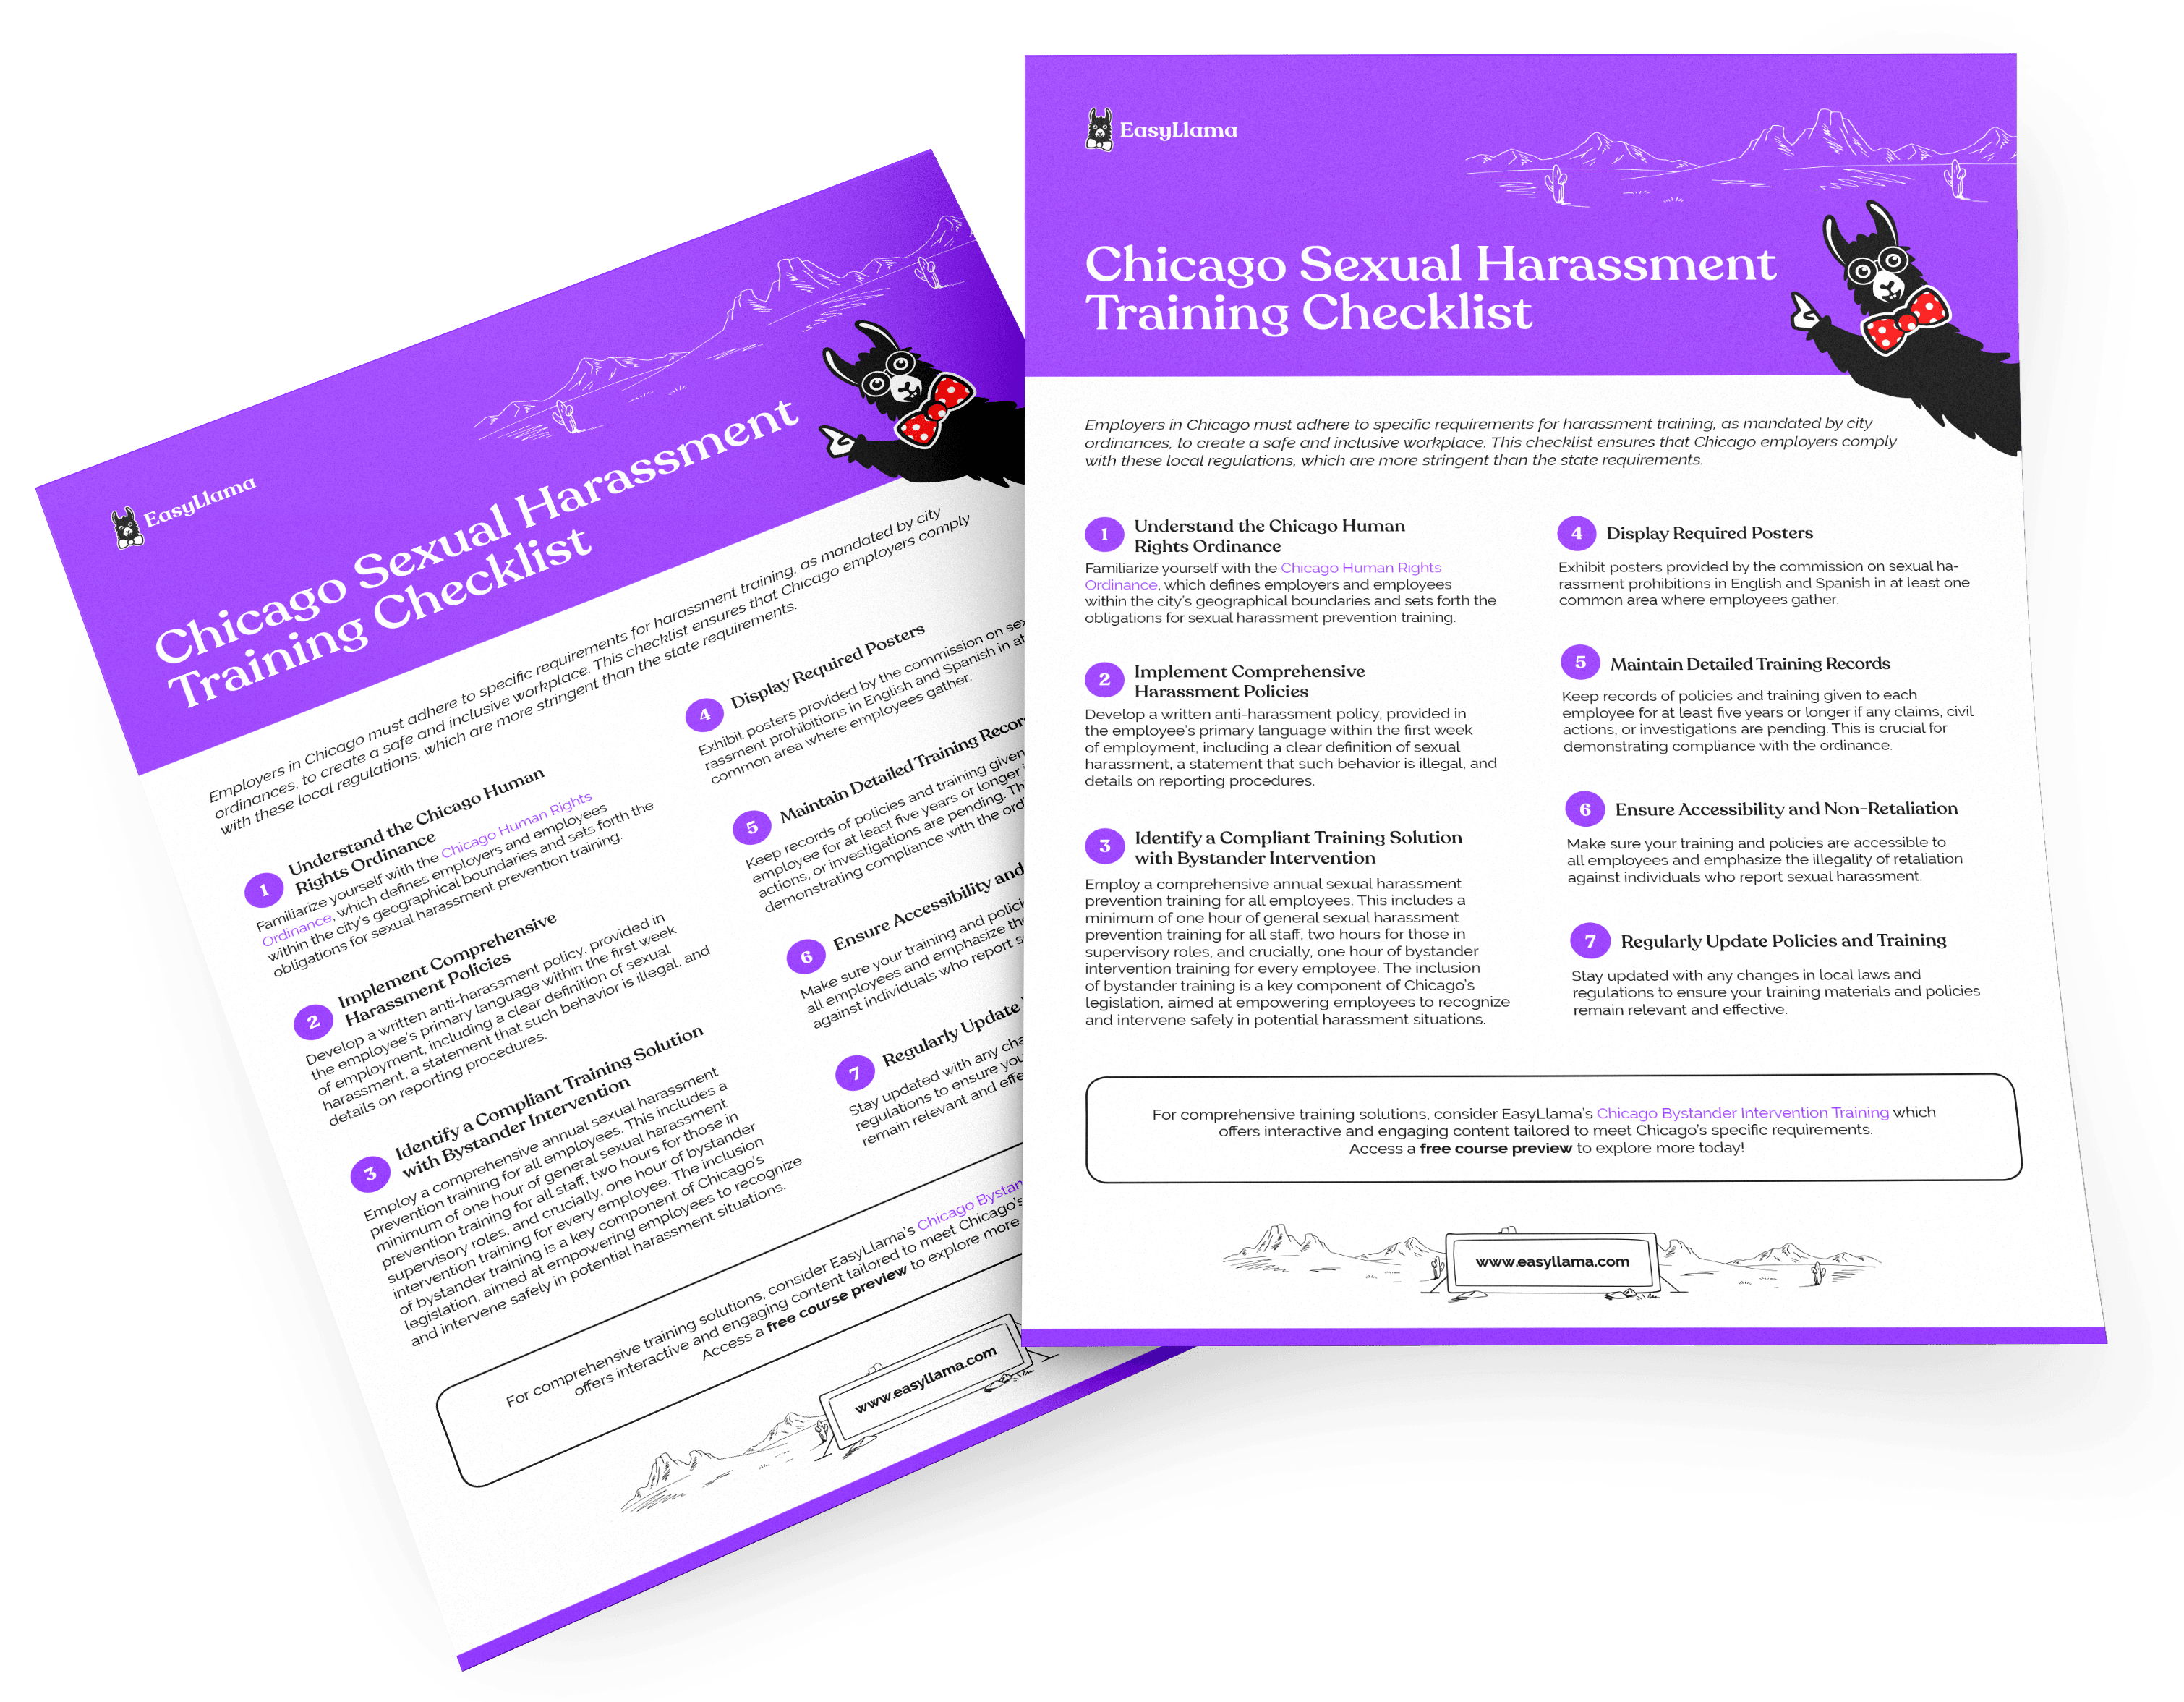 Chicago Sexual Harassment Training Requirements Checklist